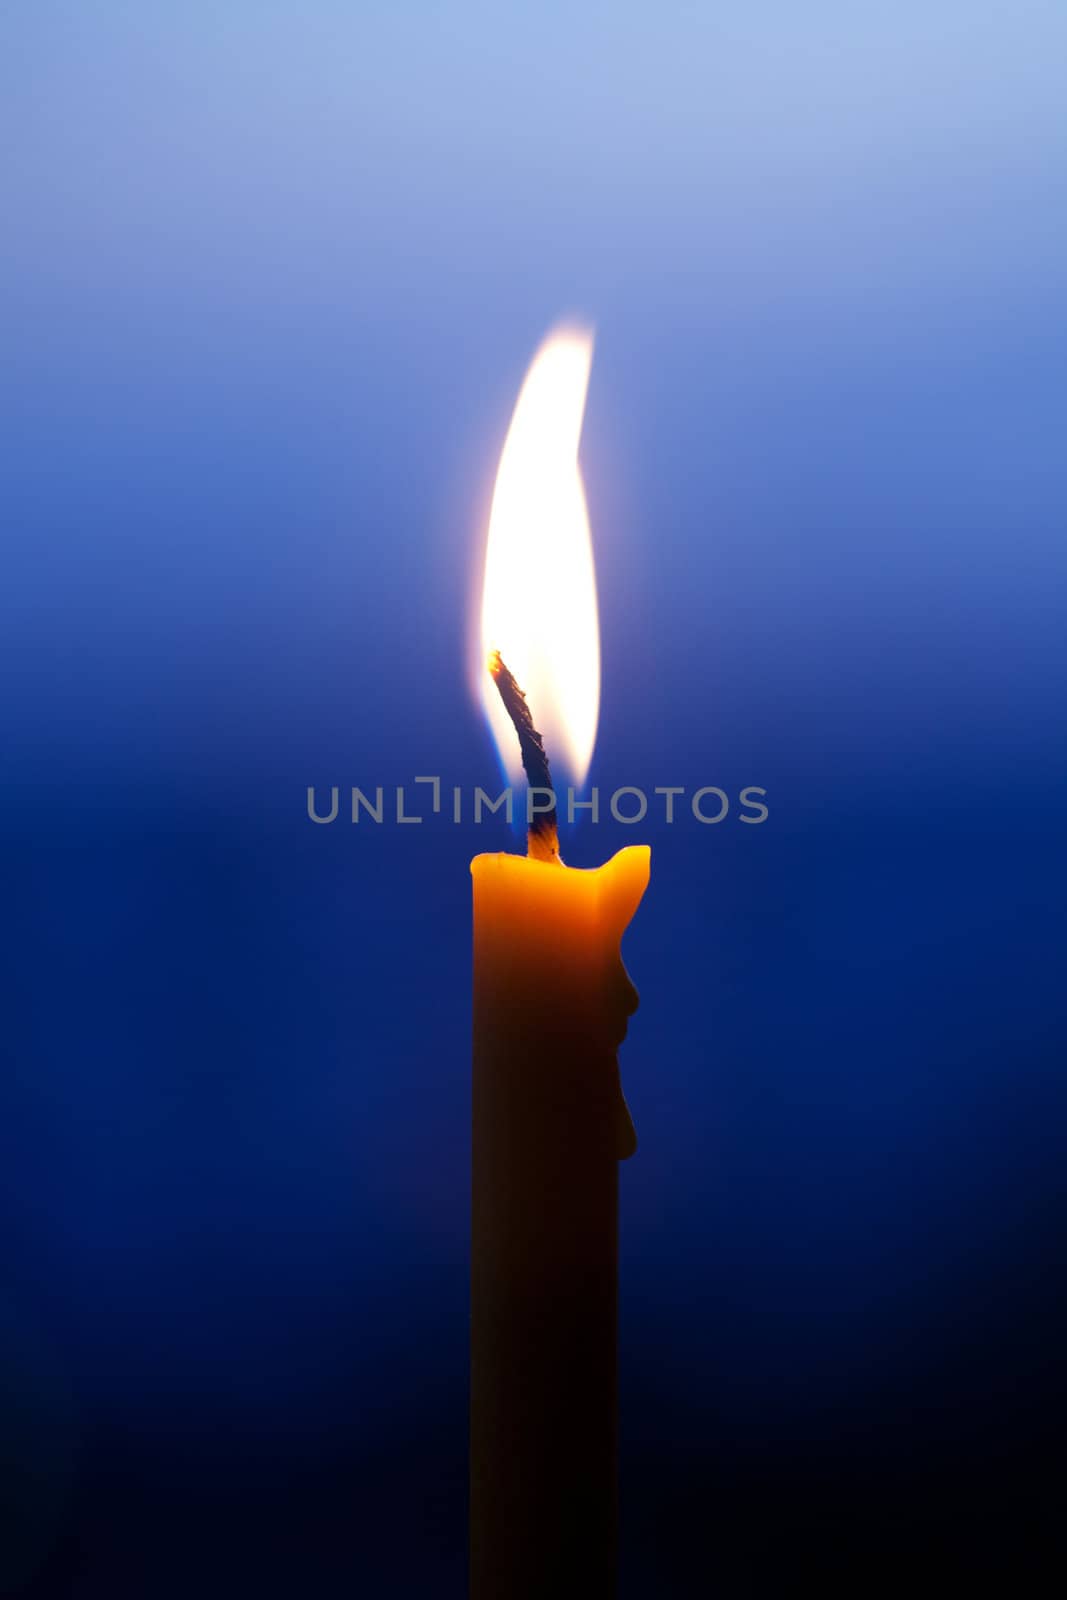 Burning candle by foto76